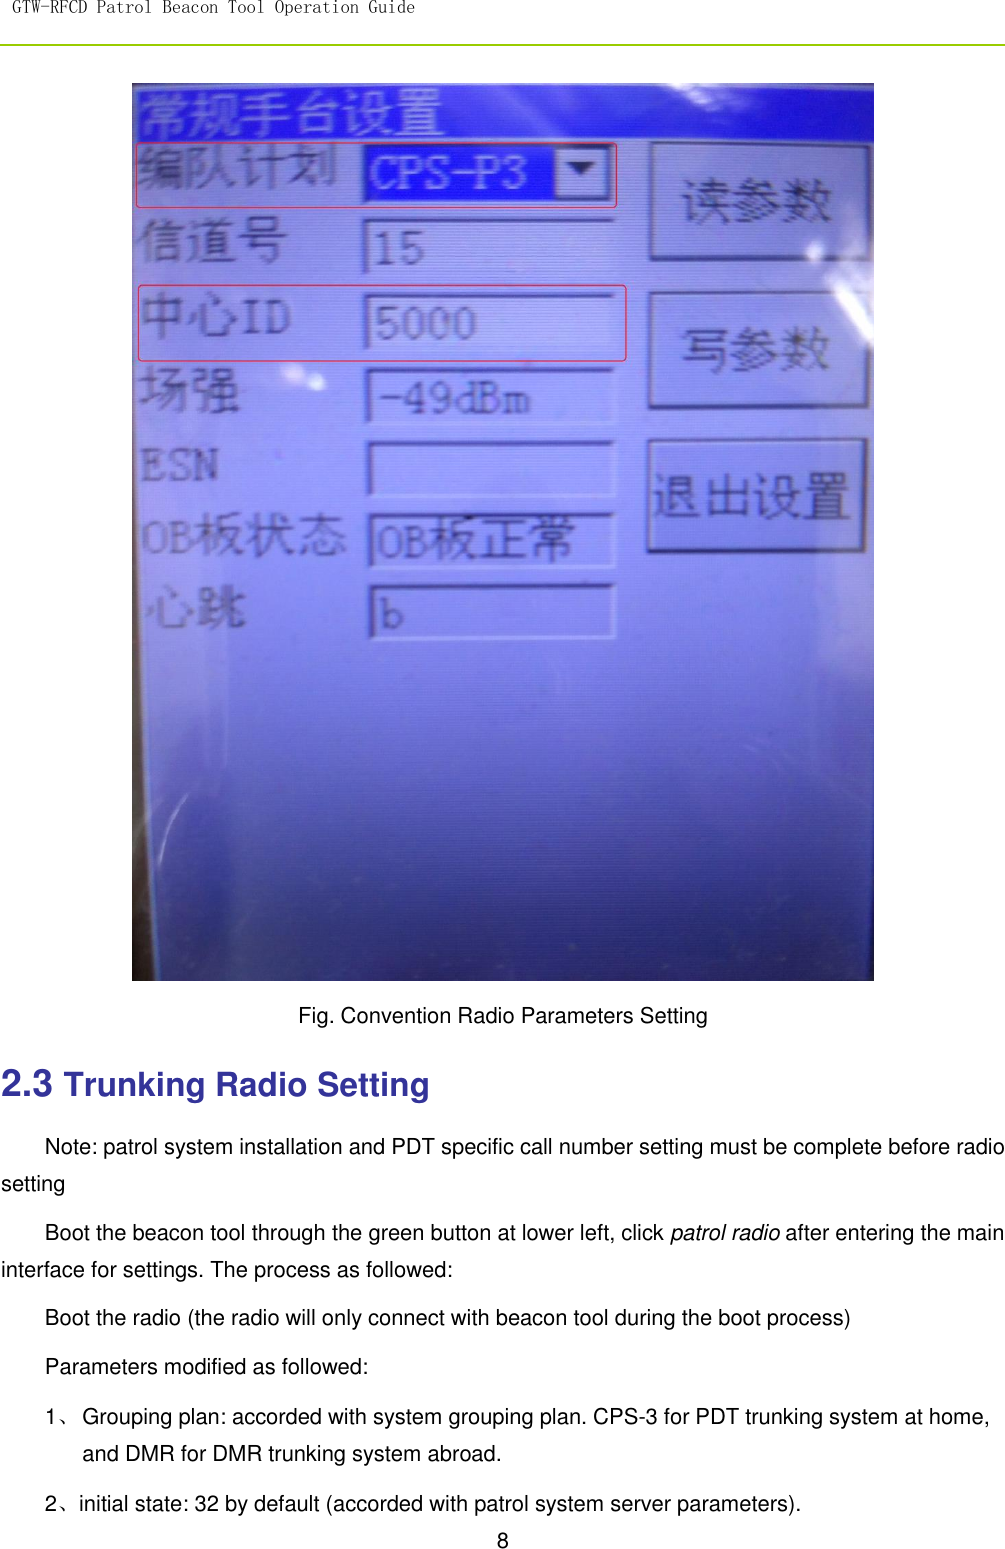 GTW-RFCD Patrol Beacon Tool Operation Guide   8   Fig. Convention Radio Parameters Setting   2.3 Trunking Radio Setting Note: patrol system installation and PDT specific call number setting must be complete before radio setting   Boot the beacon tool through the green button at lower left, click patrol radio after entering the main interface for settings. The process as followed: Boot the radio (the radio will only connect with beacon tool during the boot process)   Parameters modified as followed: 1、 Grouping plan: accorded with system grouping plan. CPS-3 for PDT trunking system at home, and DMR for DMR trunking system abroad. 2、initial state: 32 by default (accorded with patrol system server parameters). 